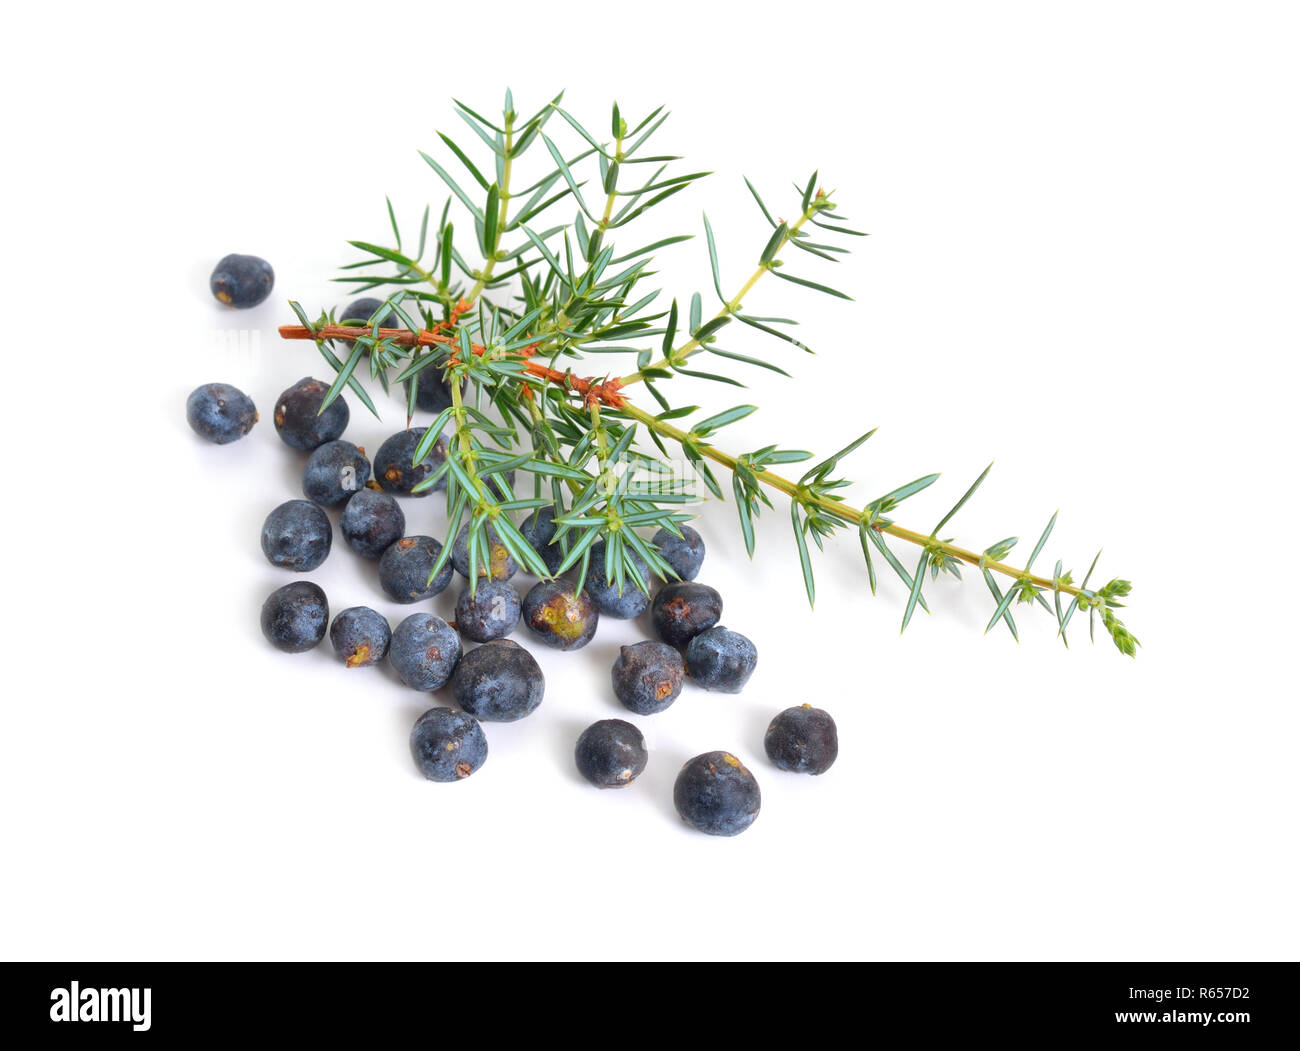 Cones and leaves of Juniperus communis isolated on white background. Stock Photo